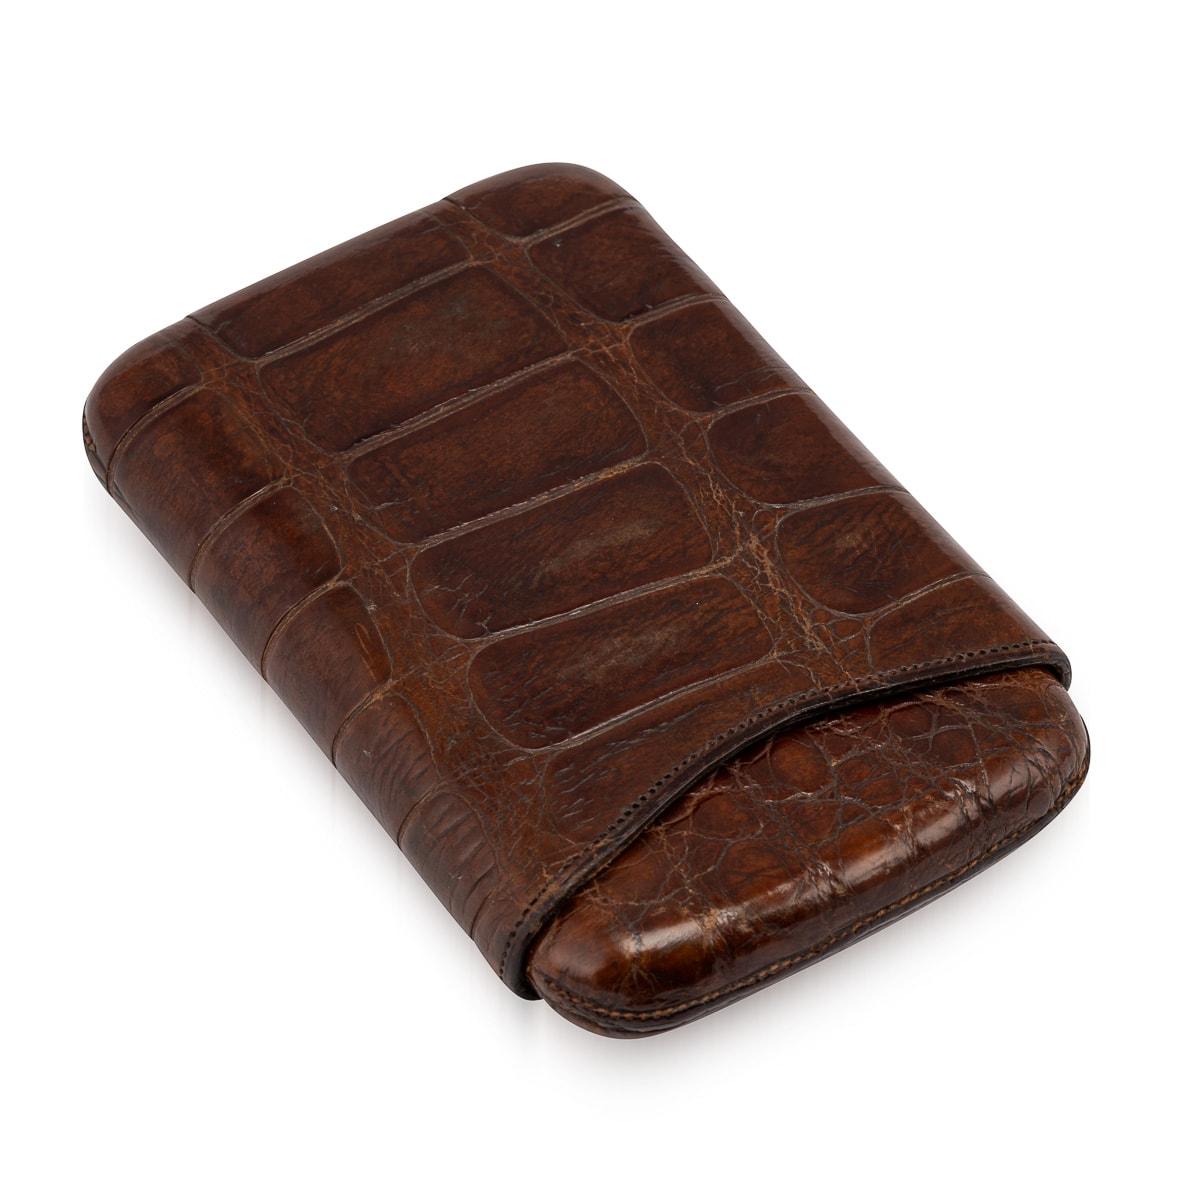 A crocodile skin cigar case of exceptional quality, meticulously crafted in England during the early part of the 20th century, around 1910/20. Exhibiting a timeless design, this wonderful cigar case adheres to the typical form with an inner sleeve.